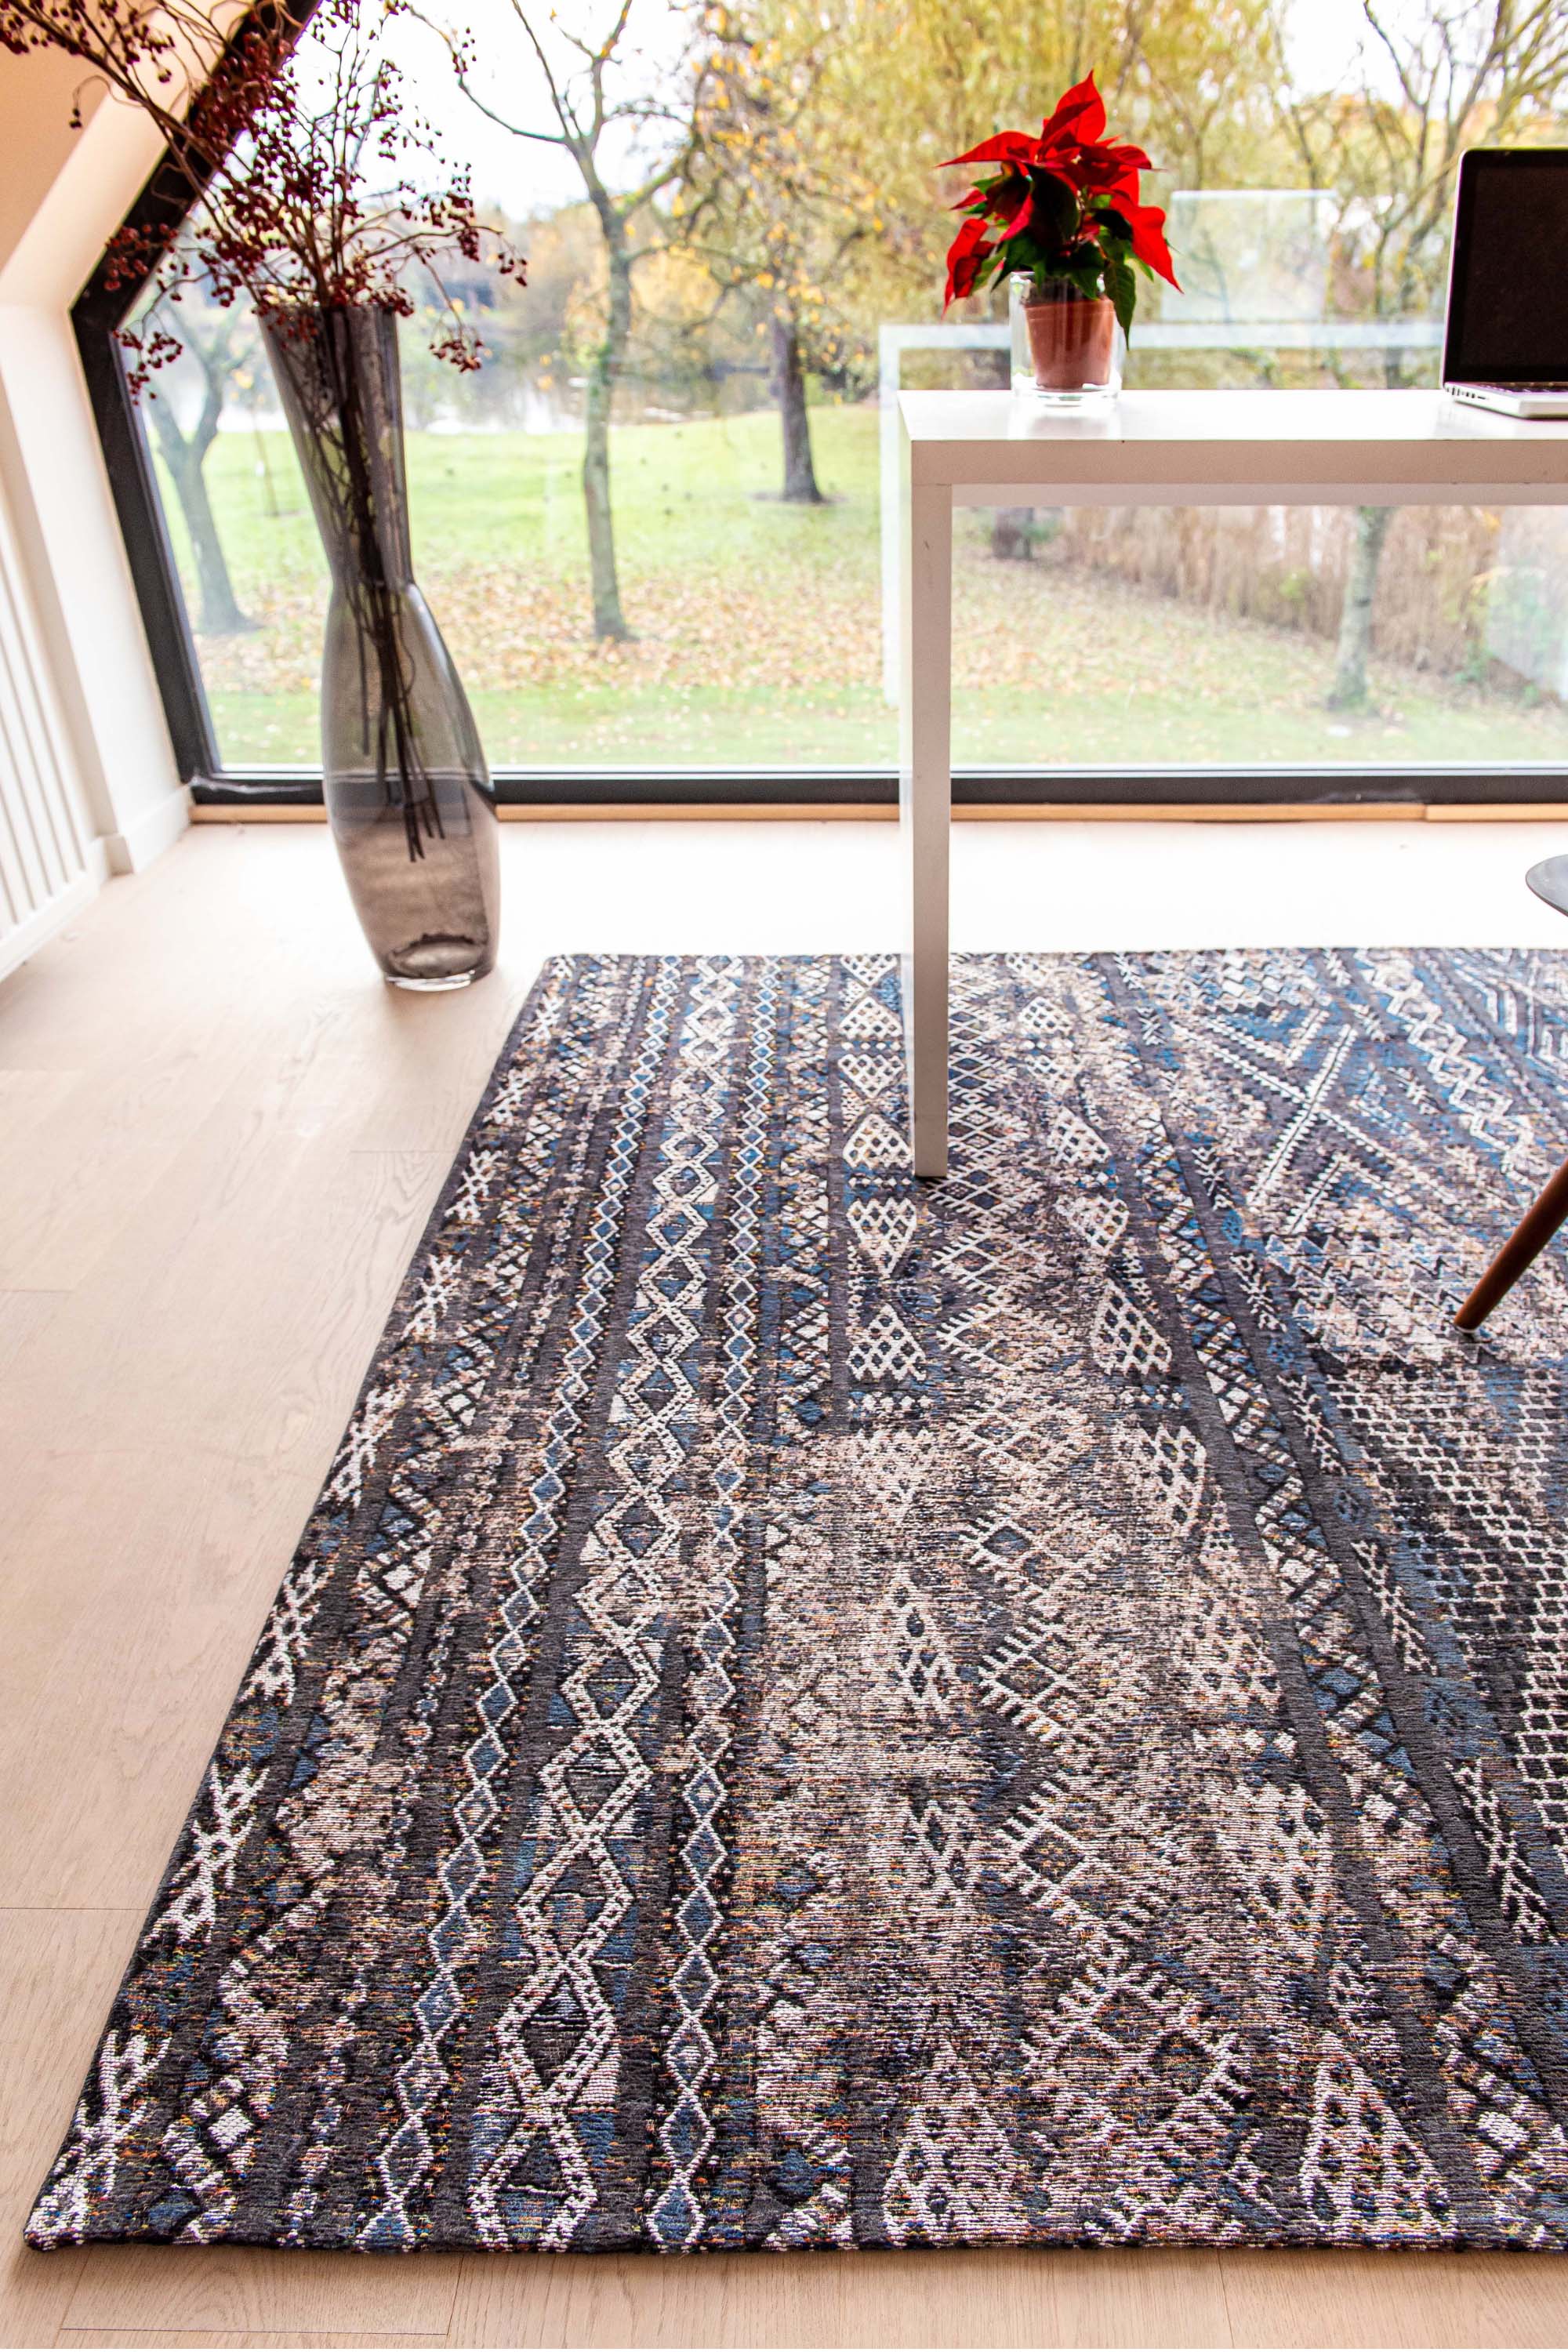 brown rug with a moroccan geometric pattern